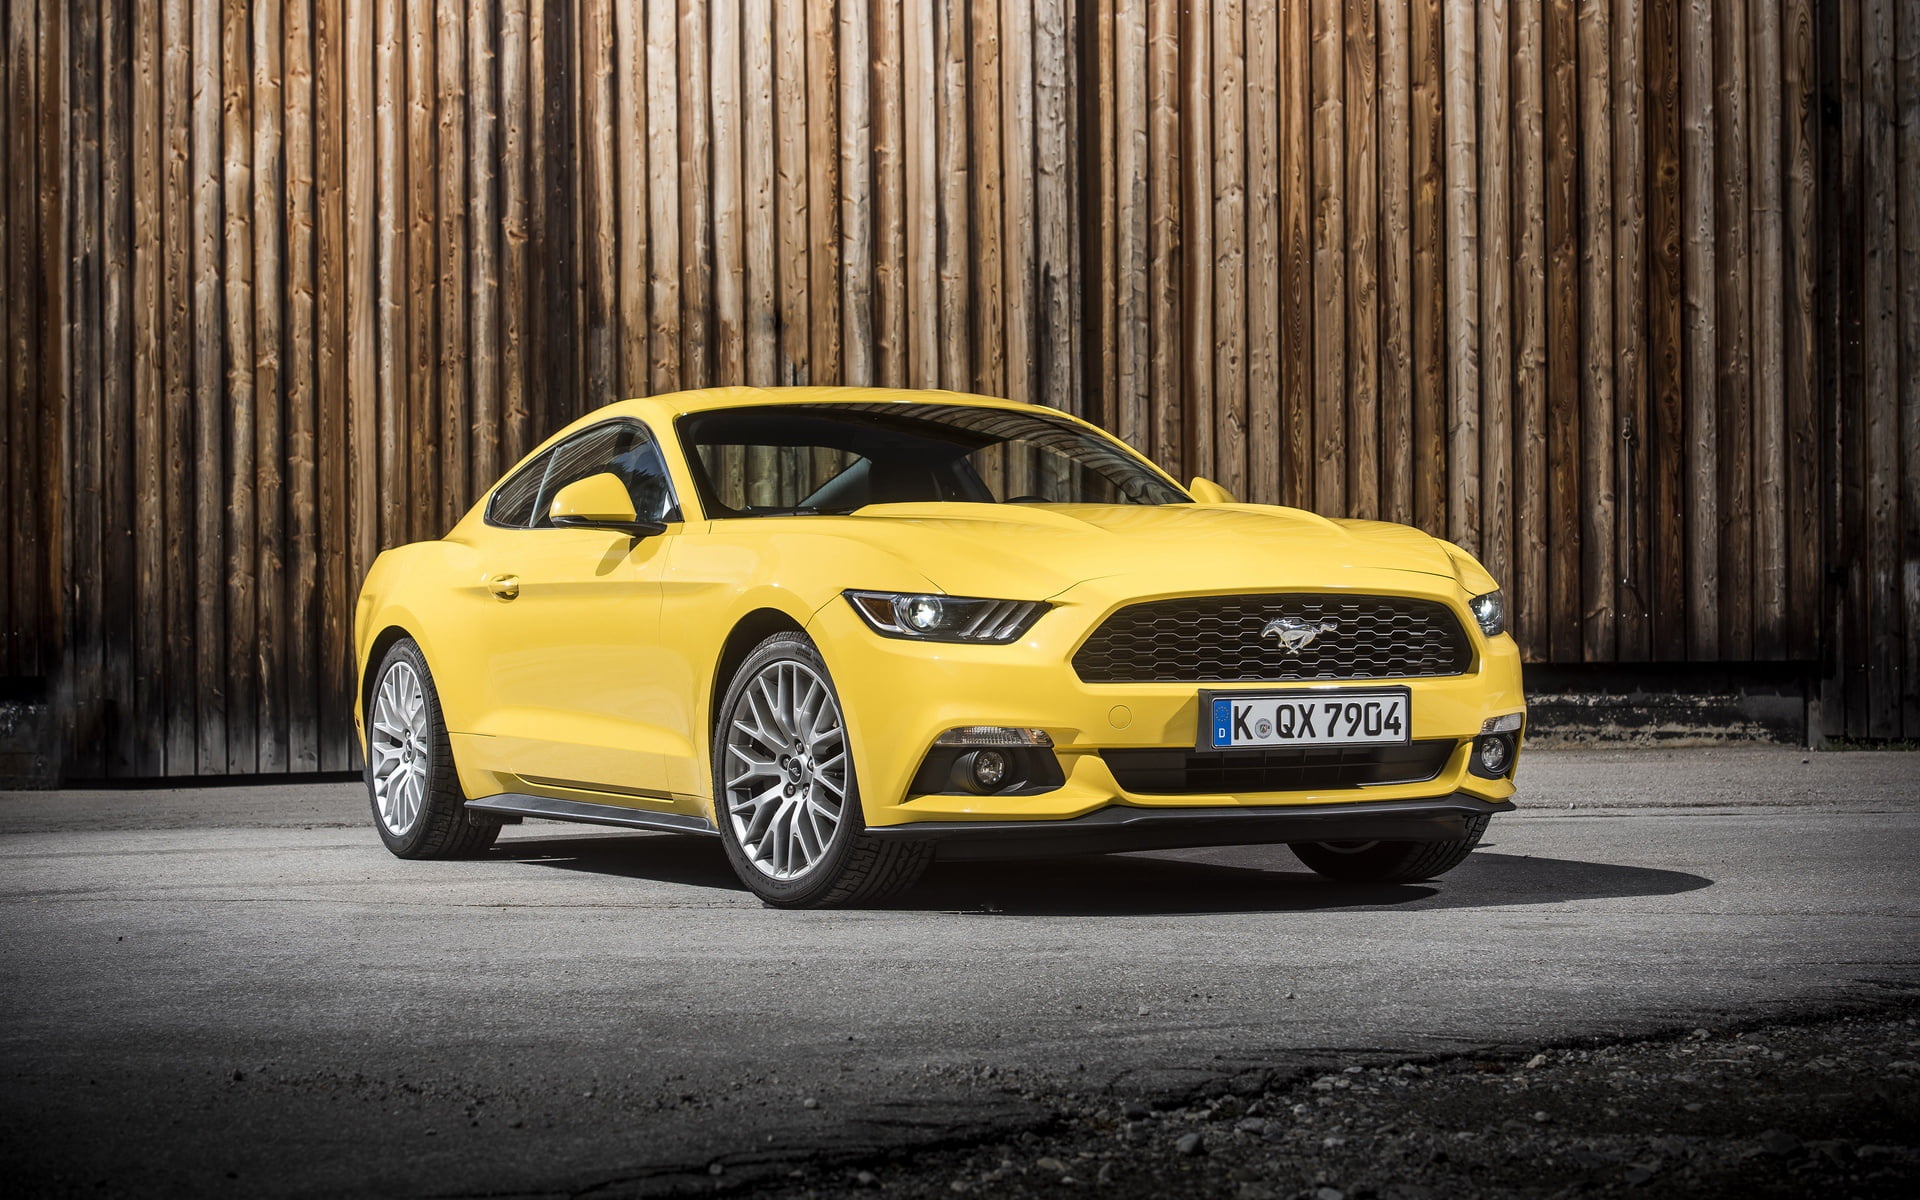 Ford, Ford Mustang, Car, Muscle Car, Vehicle, Yellow Car